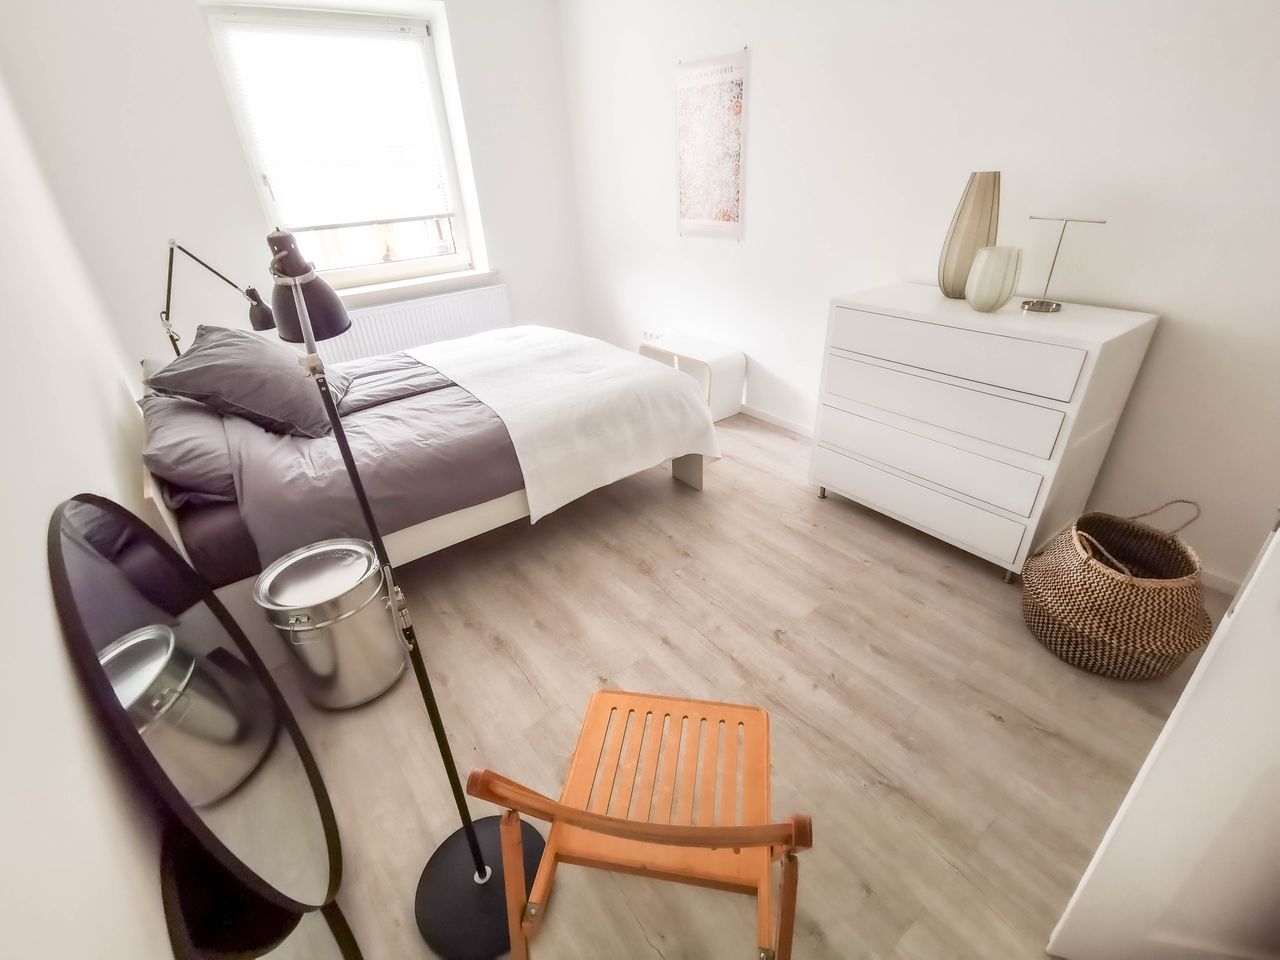 Gorgeous, bright and fully furnished temporary apartment in the middle of Munich